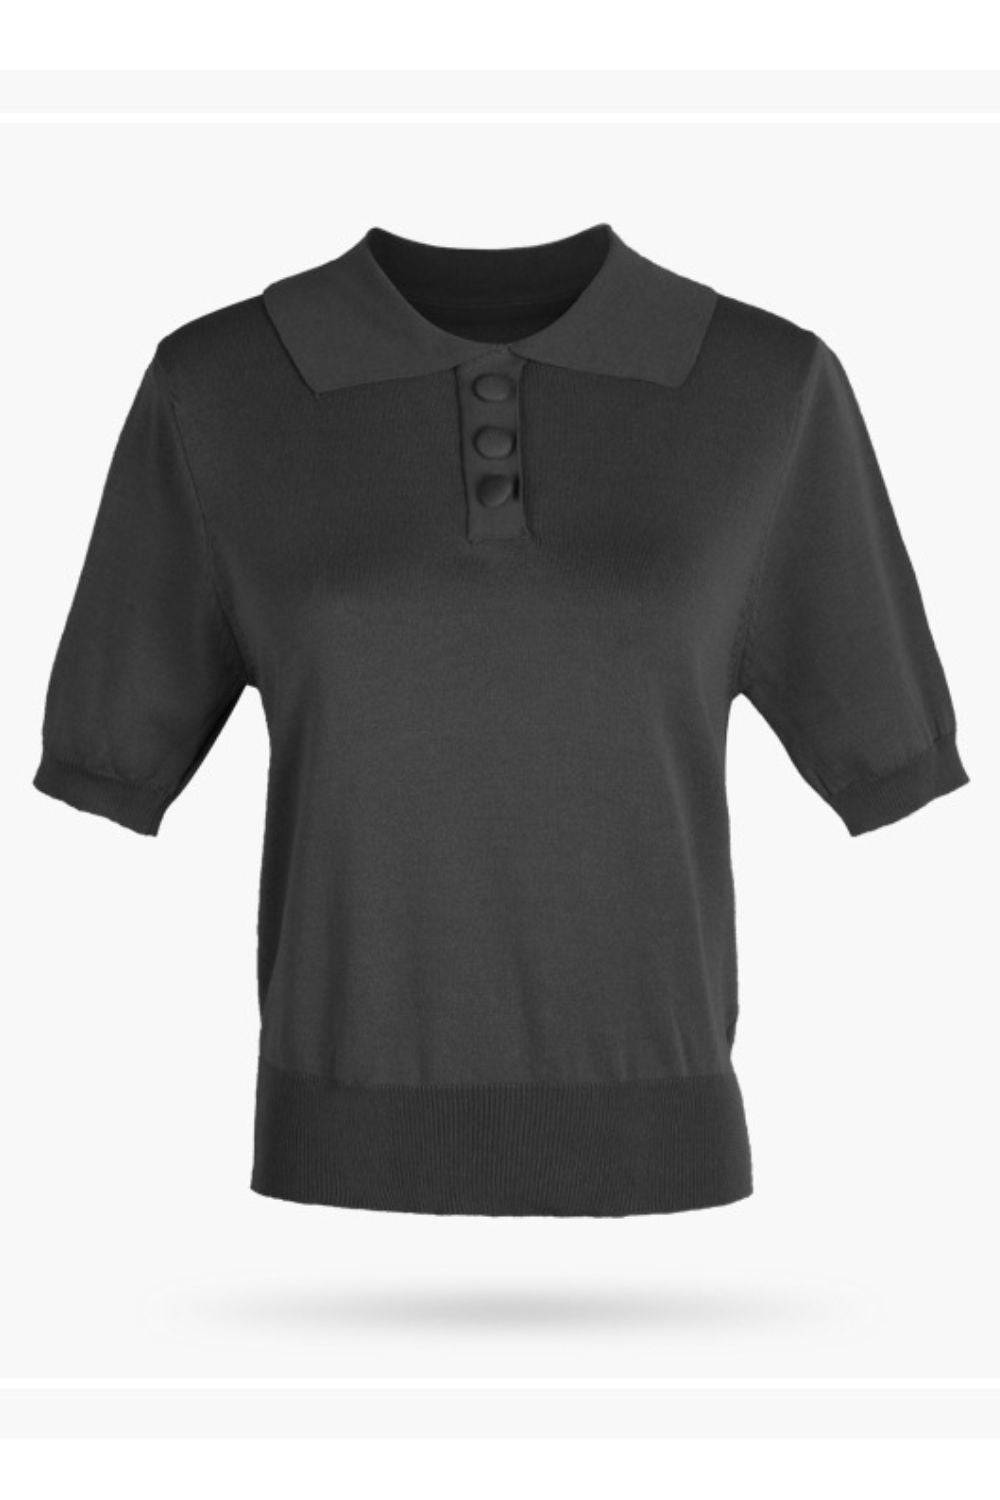 Embrace Elegance with Our Buttoned Collared Neck Short Sleeve Knit Top - Wrap Yourself in a Soft and Cozy Embrace and Feel Like Royalty All Day Long - Guy Christopher